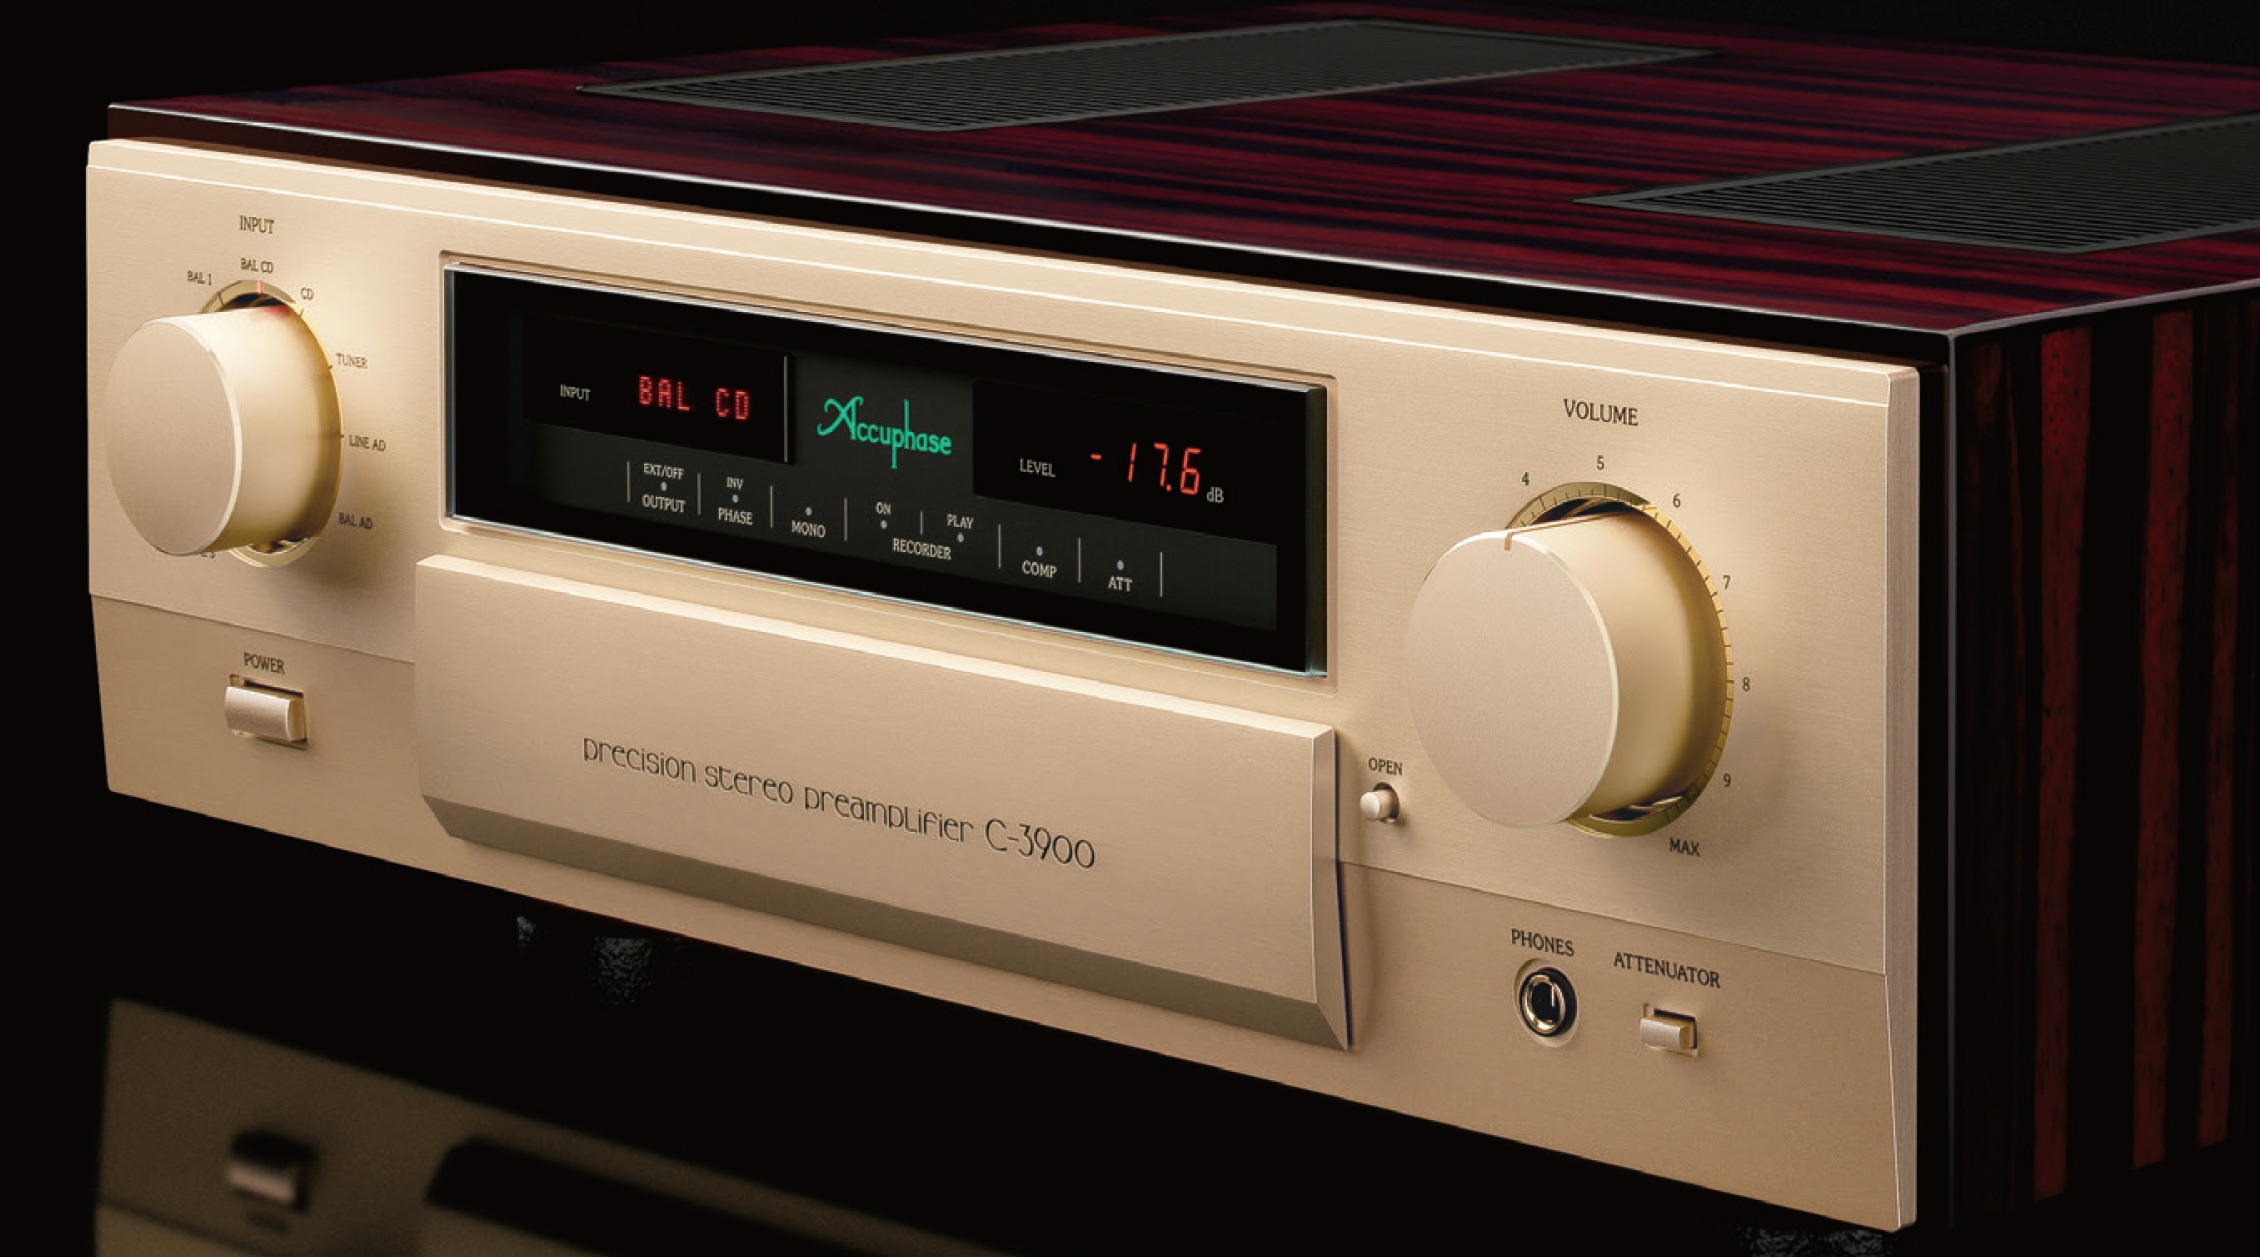 Accuphase C 3900 dep